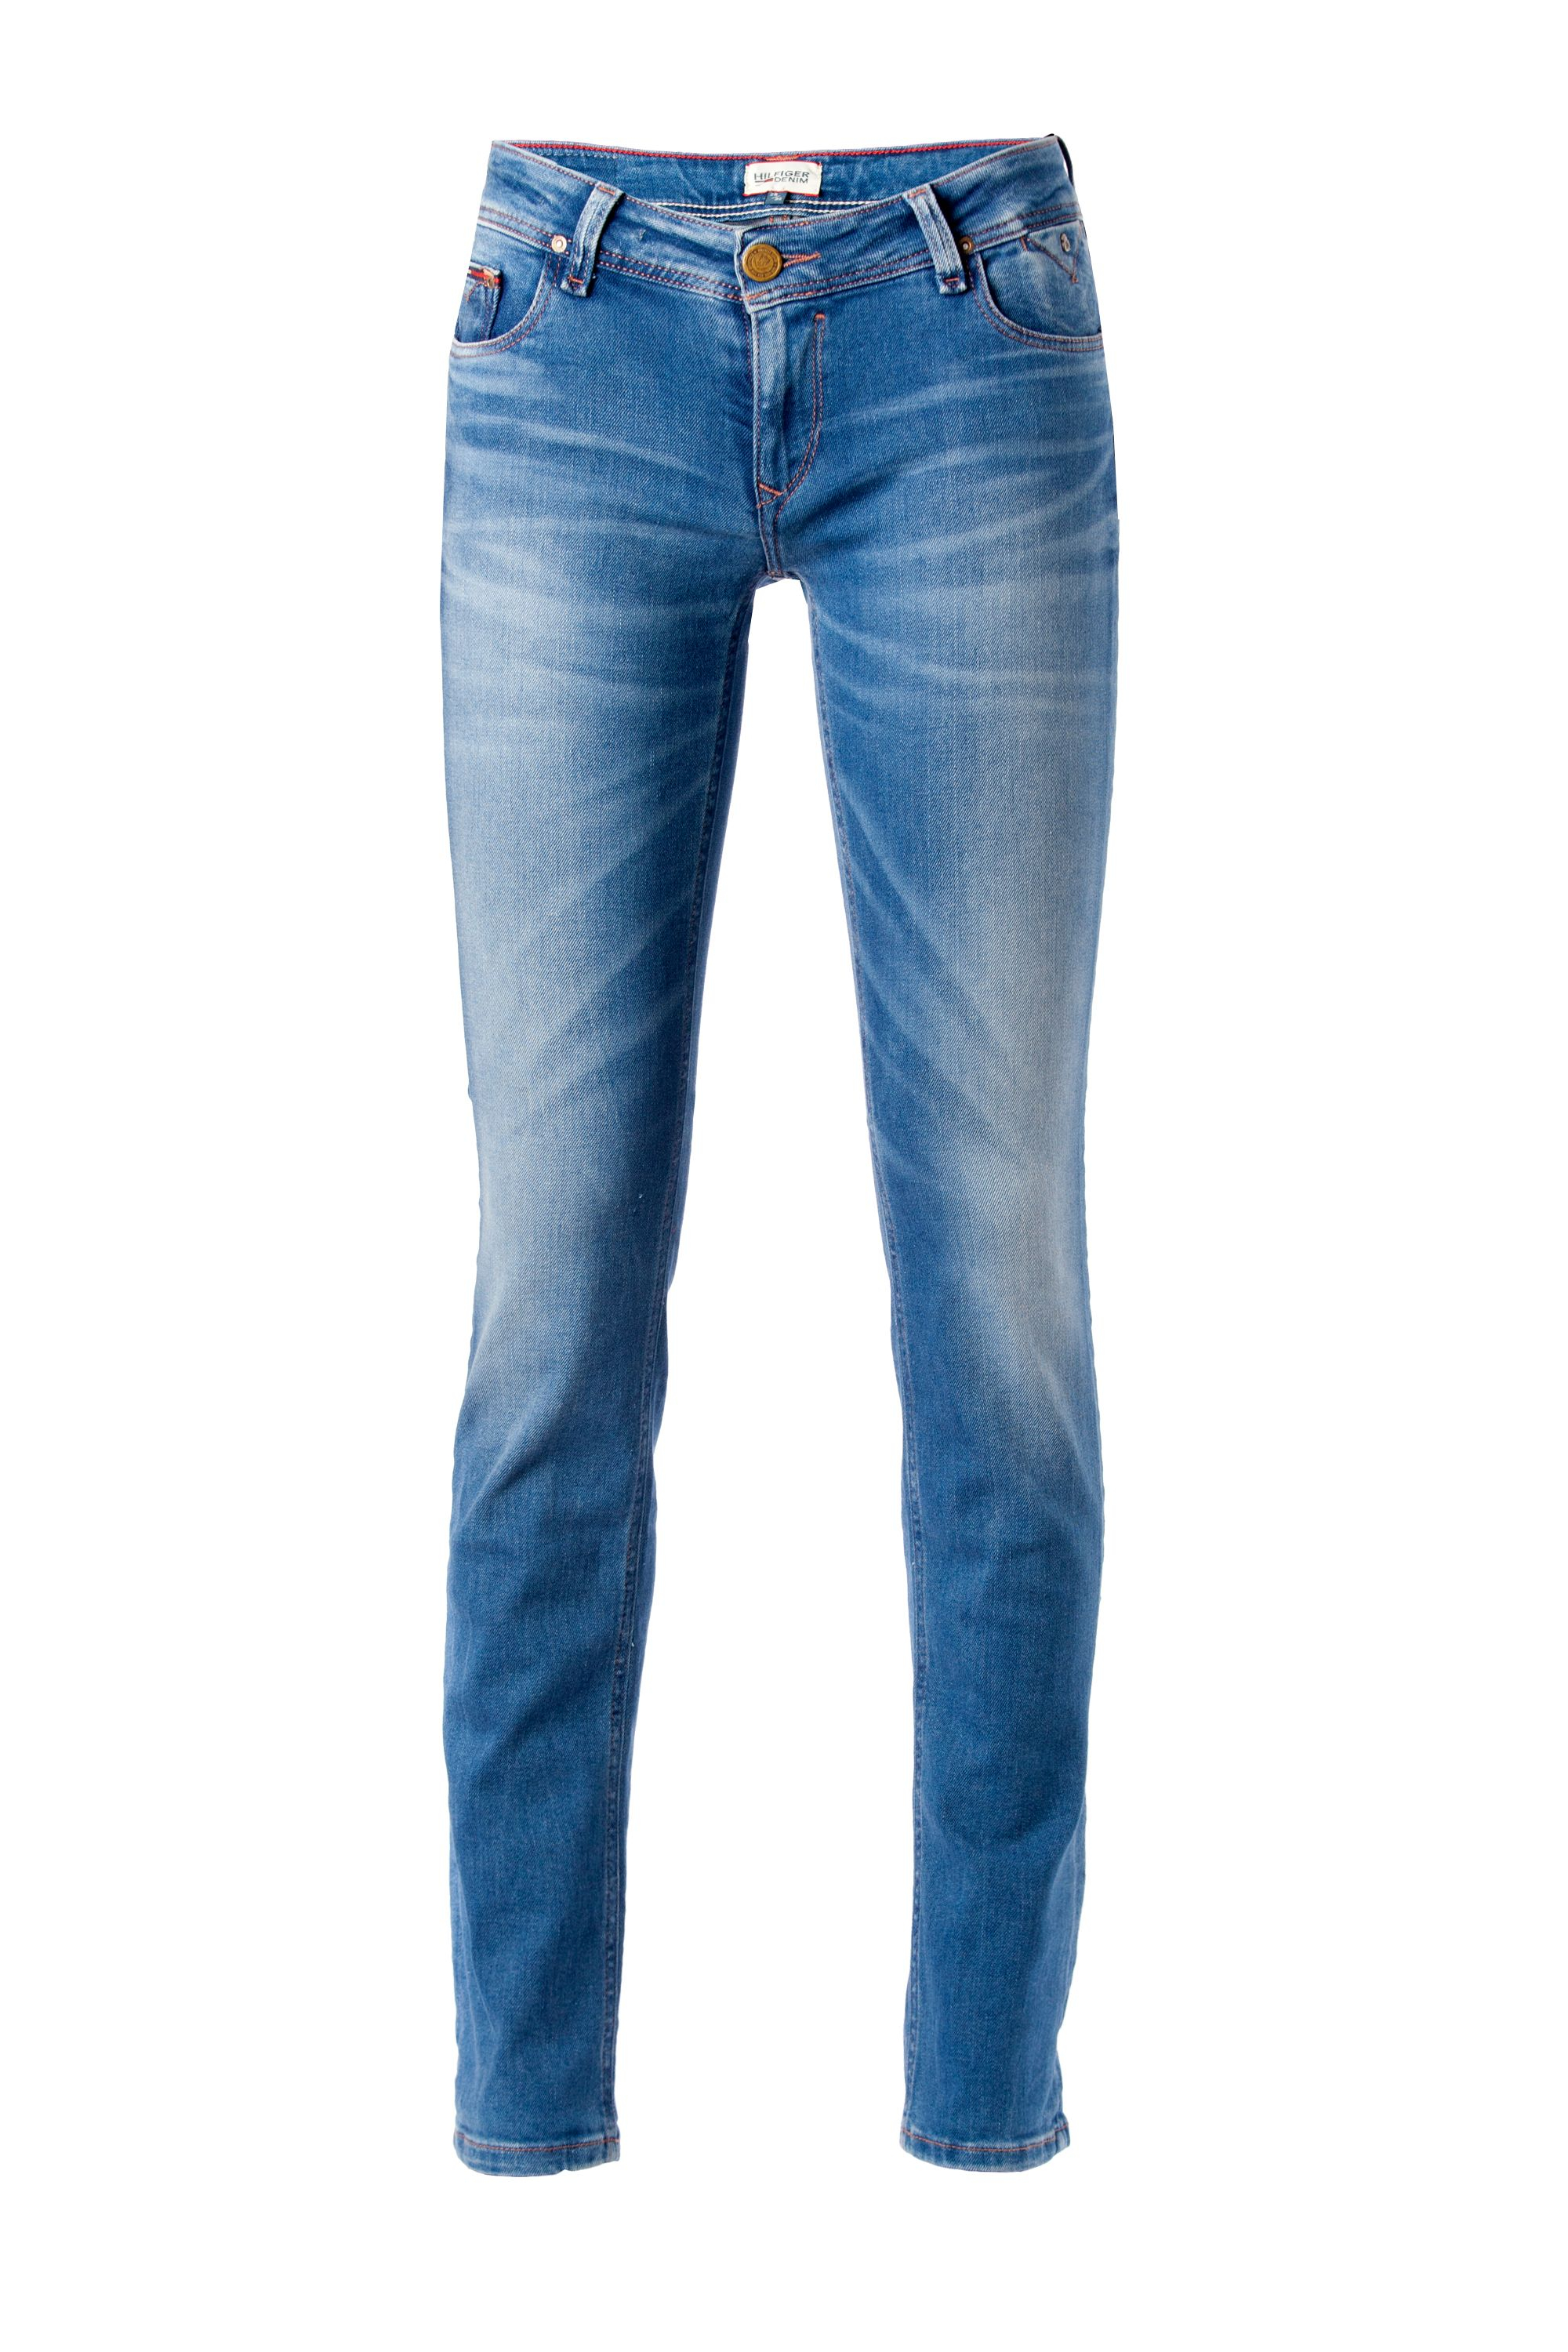 Tommy hilfiger Suzzy Jeans in Blue (Denim Mid Wash) | Lyst